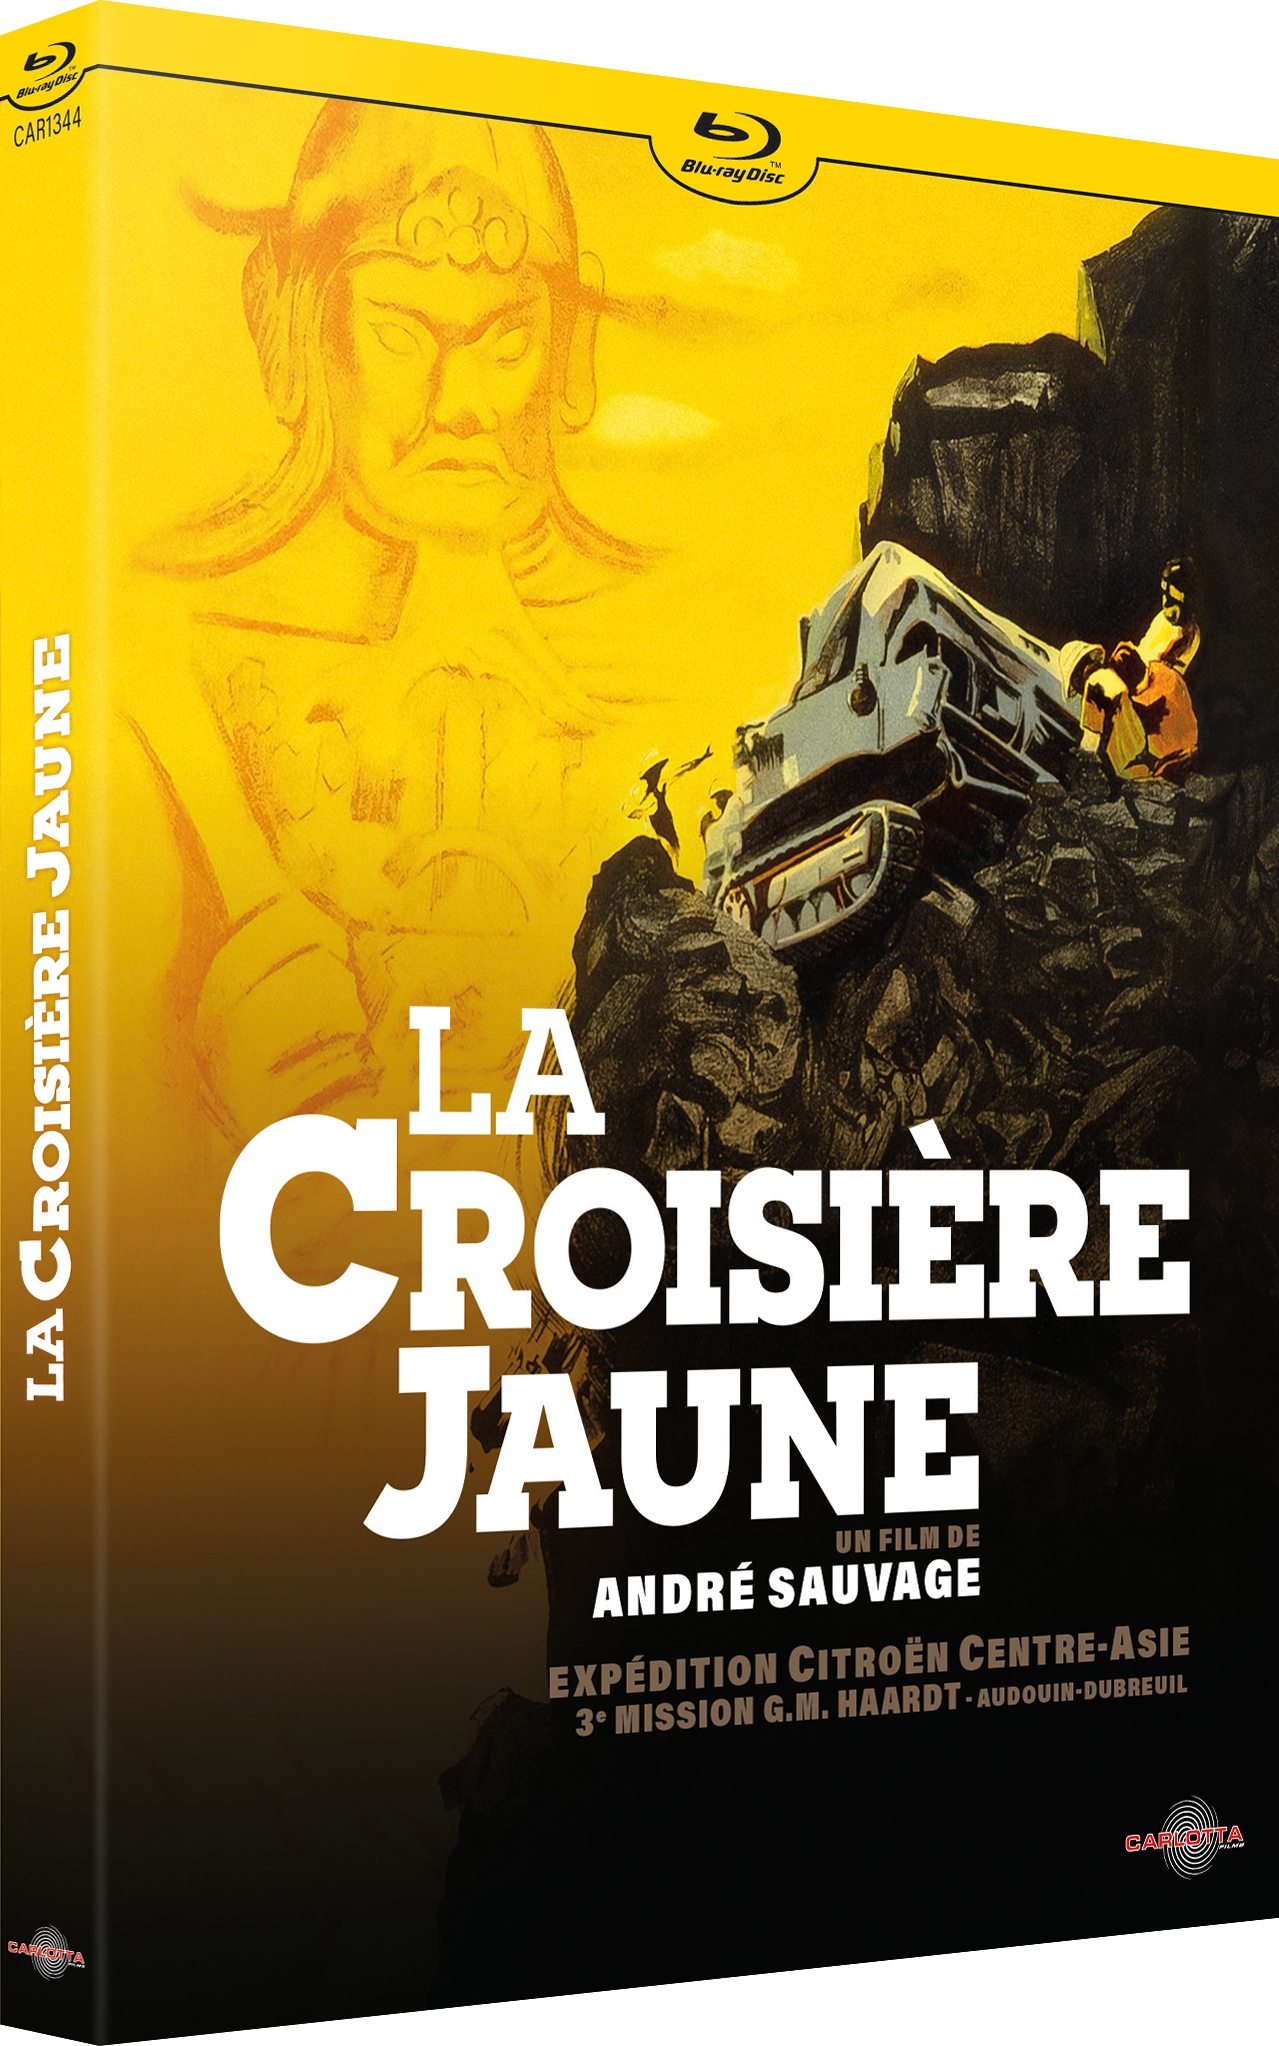 The Yellow Cruise of André Sauvage